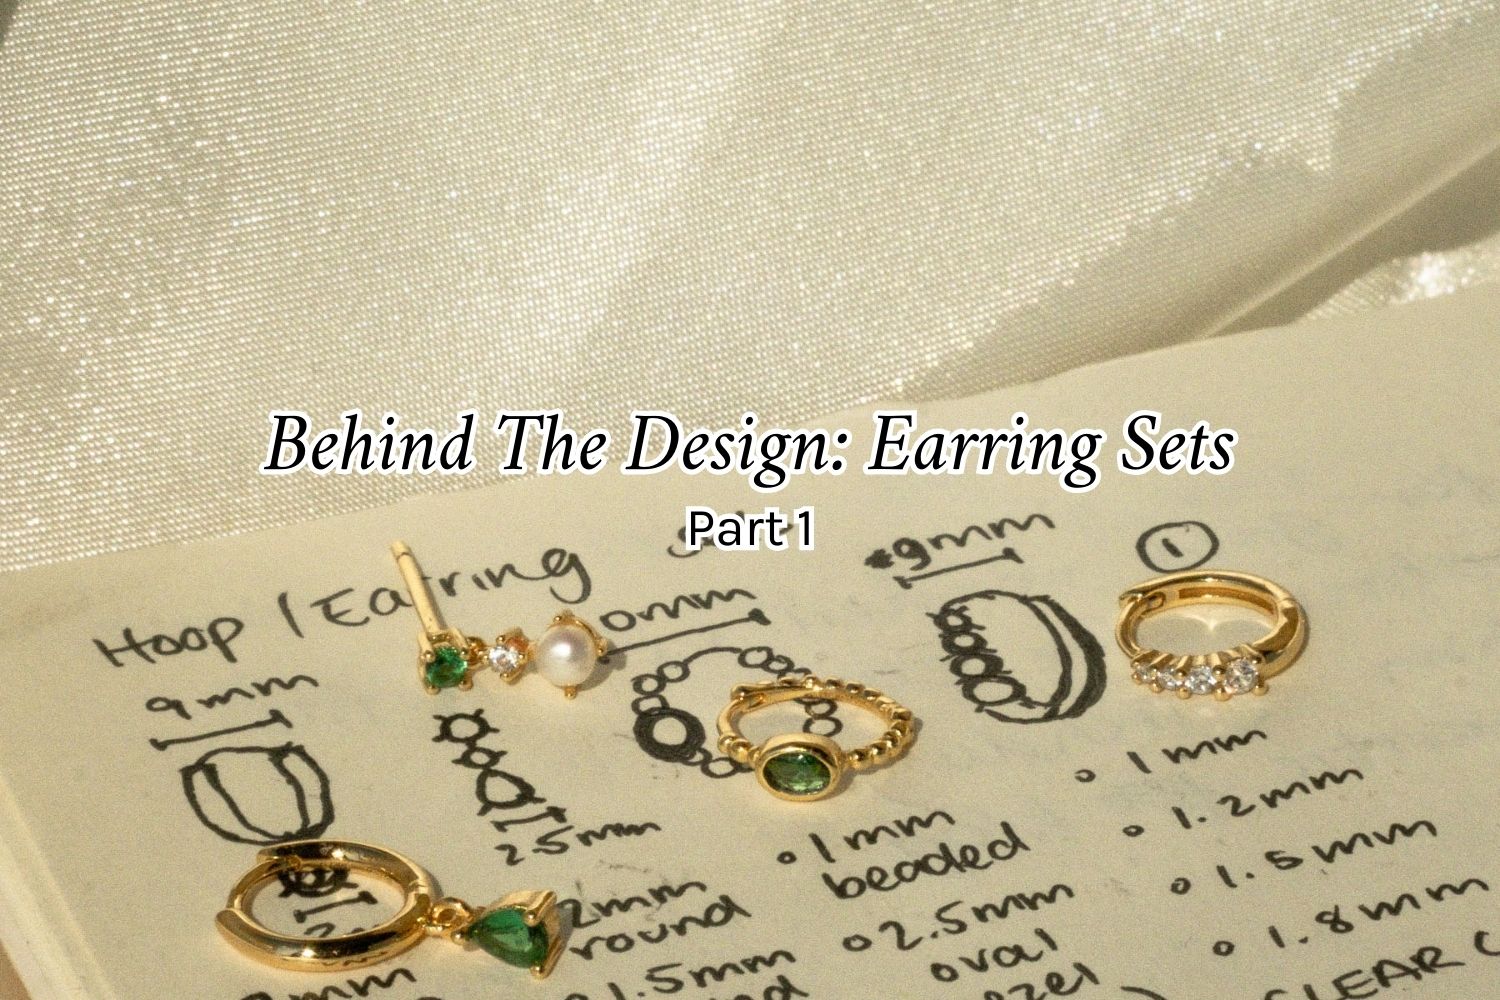 Behind The Design: Earring Sets Collection Part 1